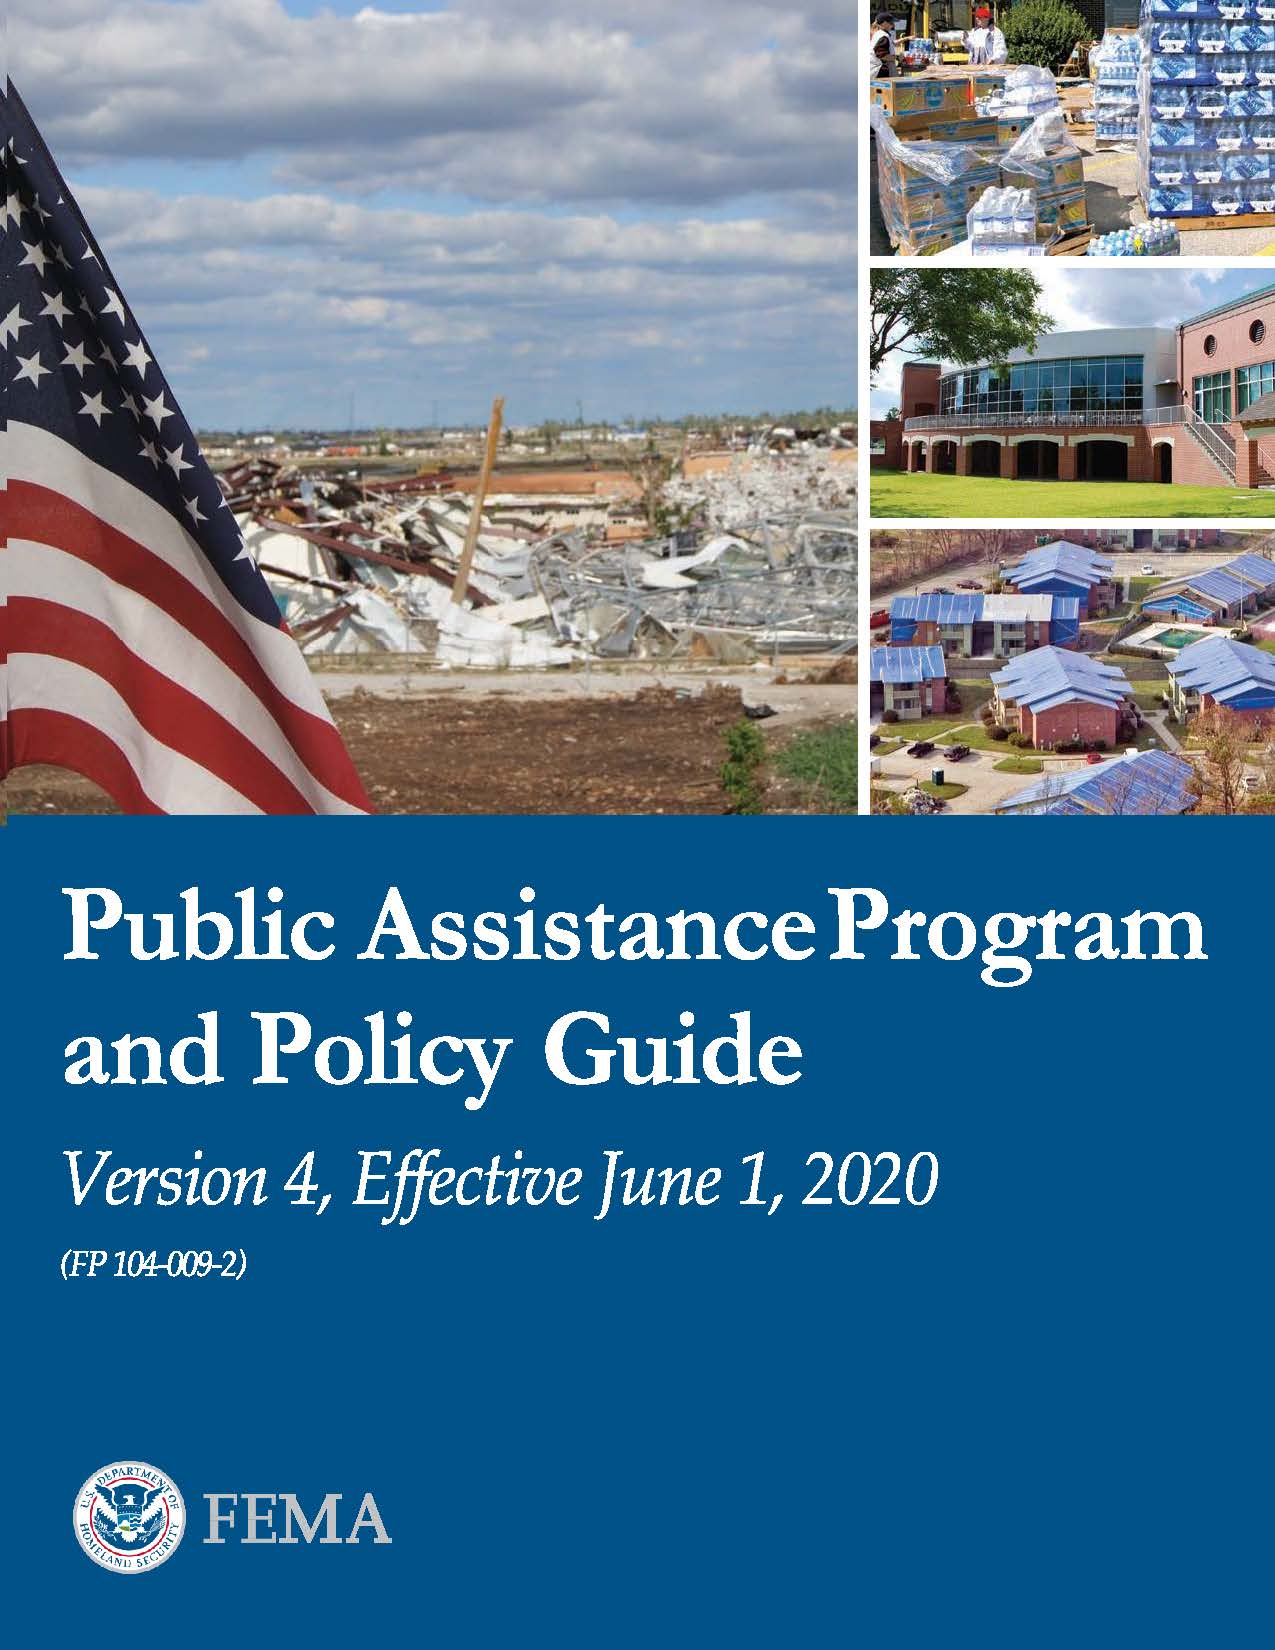 FEMA Public Assistance Program and Policy Guide